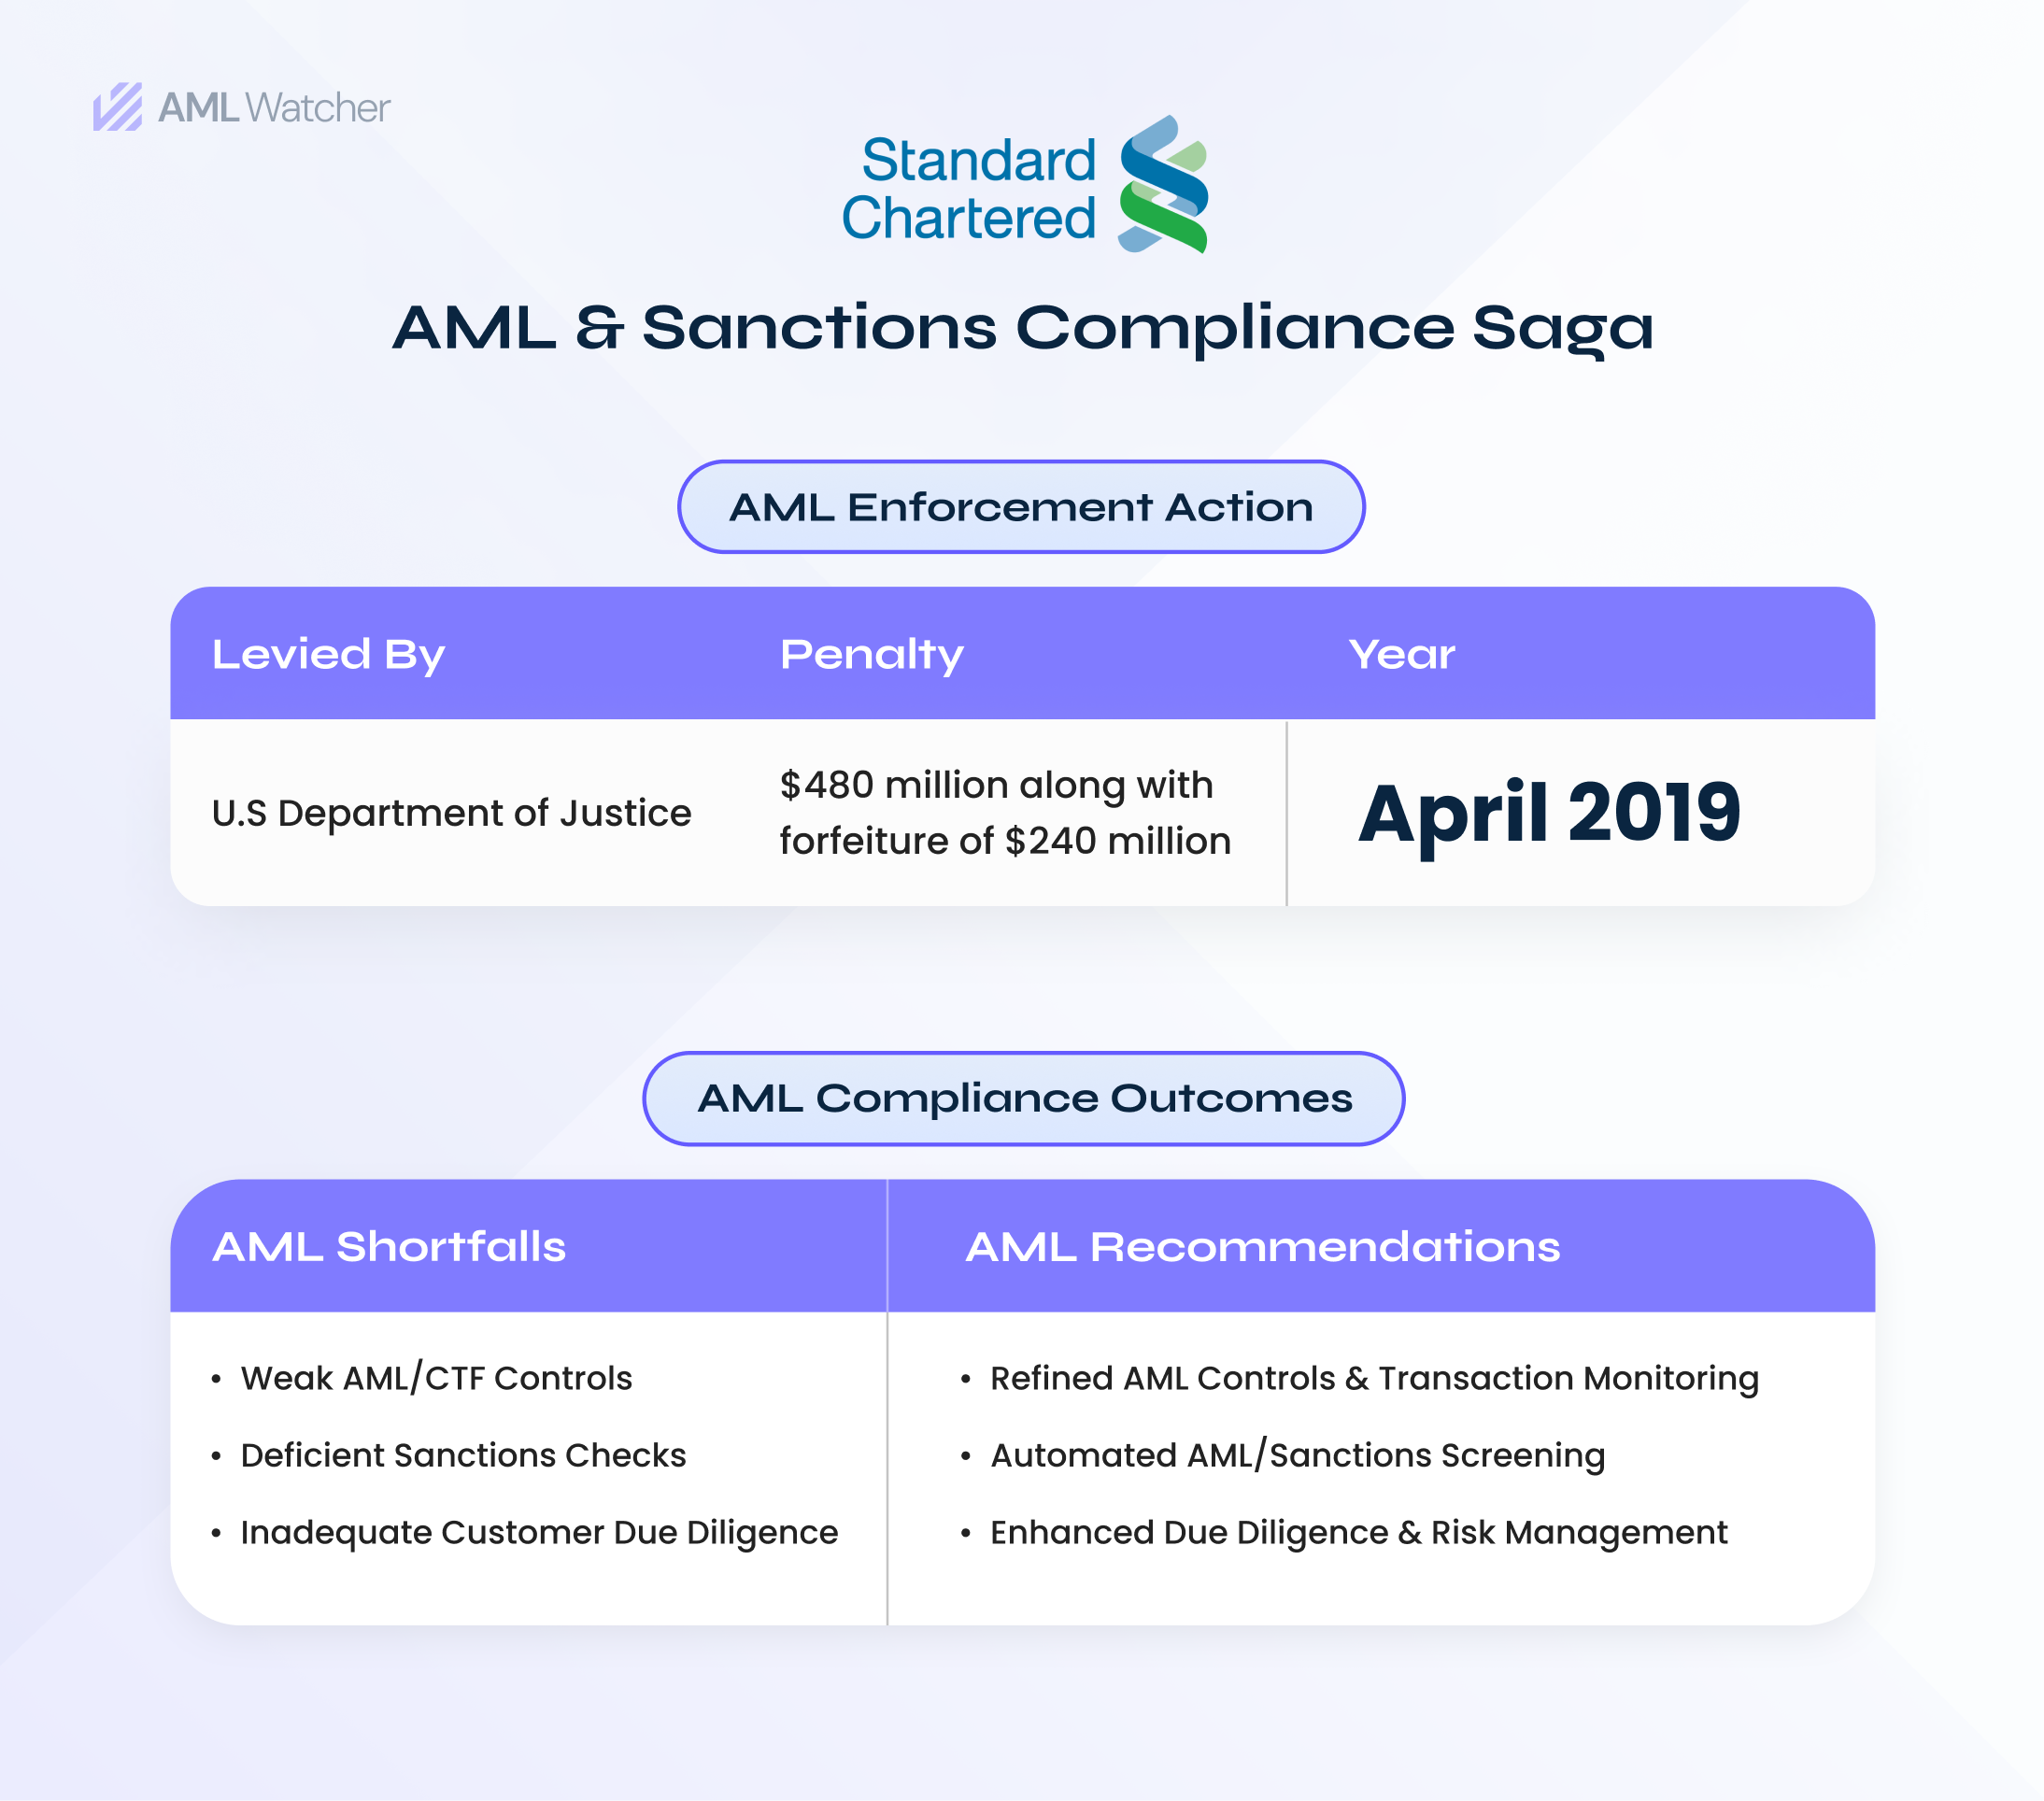 featured image shows the compliance scandal of the standard chartered bank with AML fines, penalty year, imposing body, AML compliance deficiencies, and recommended AML measures.